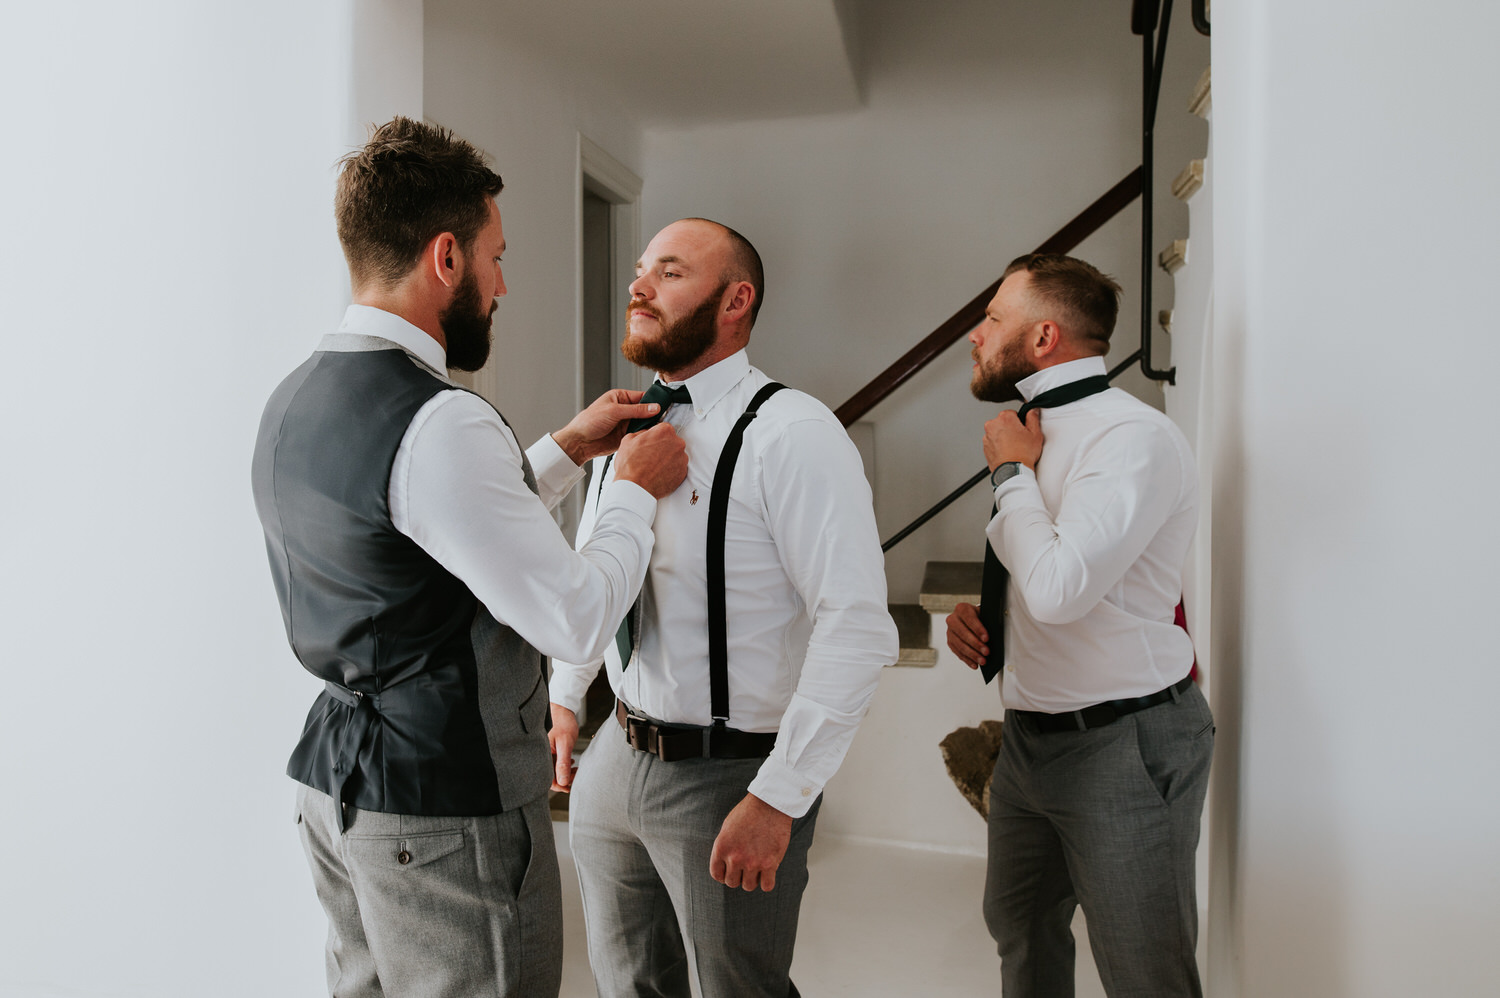 Mykonos wedding photographer: handsome groom helping his best man with the tie as they get ready.